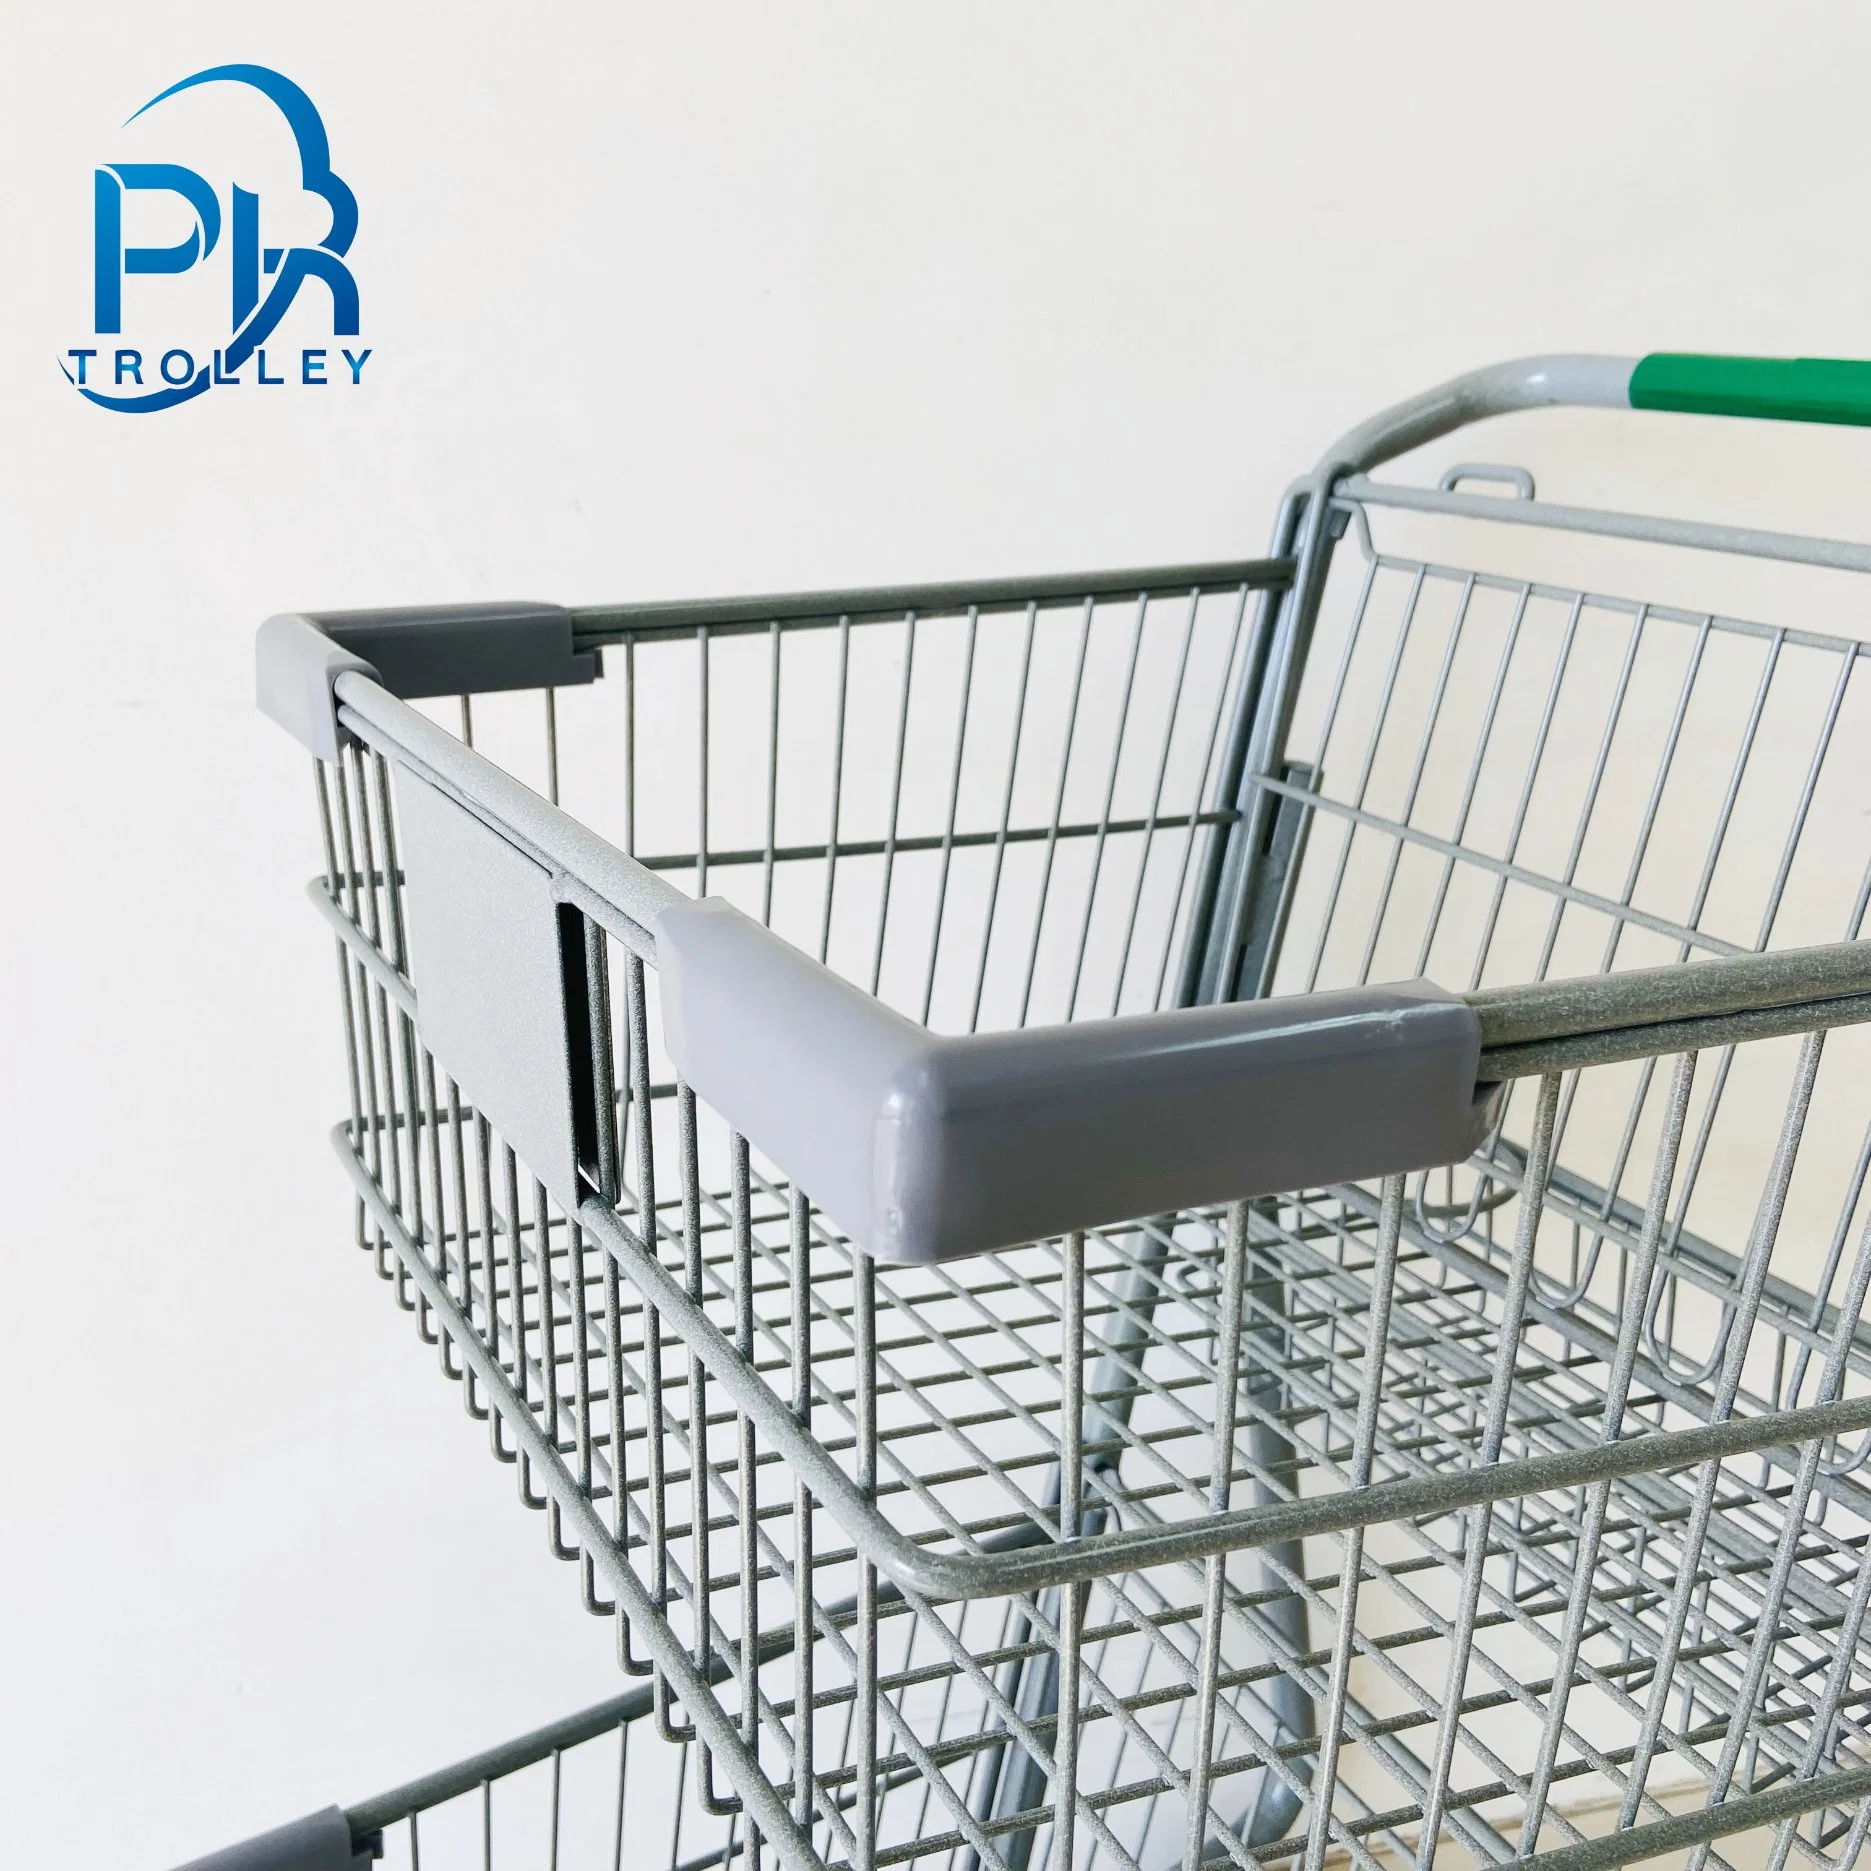 Two-Tier Metal Shopping Cart with Three Baskets for Convenience Stores